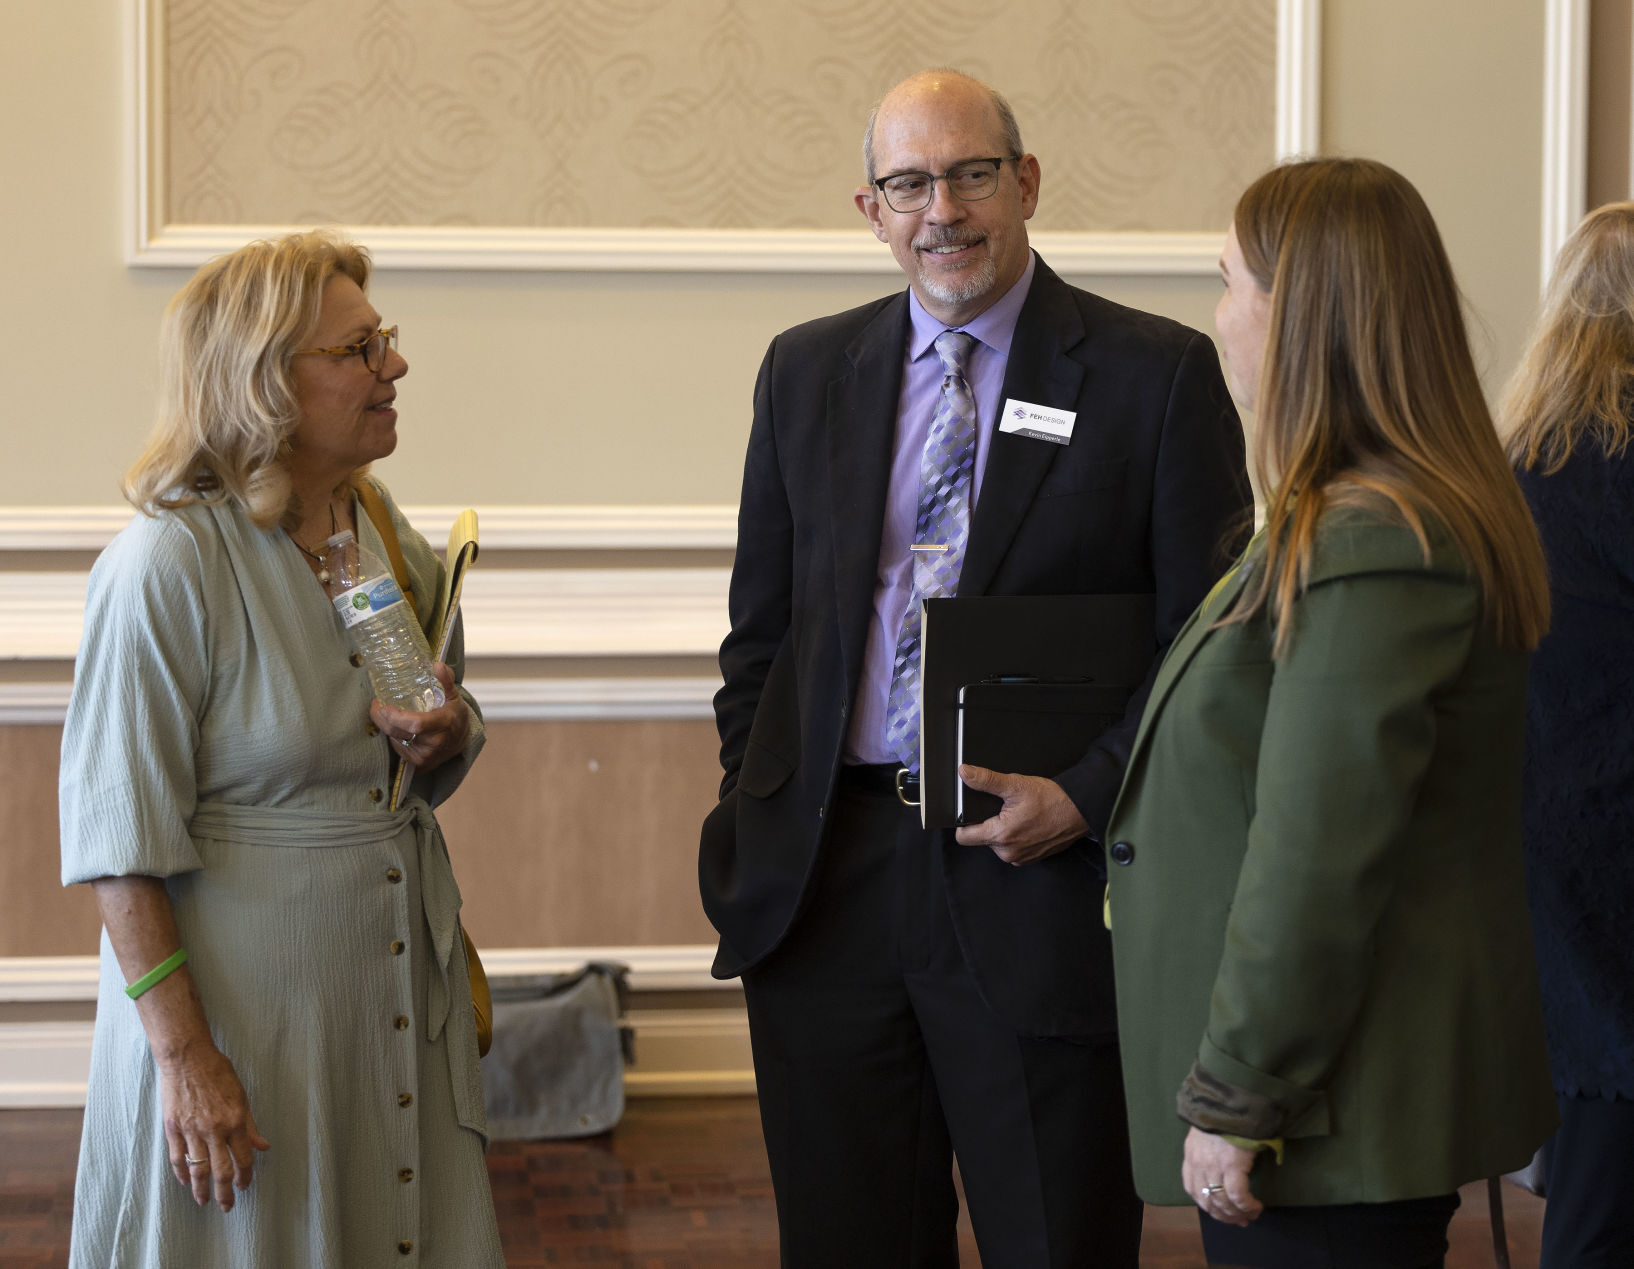 Iowa Sen. Pam Jochum, D-Dubuque, (left) speaks with FEH Design president Kevin Eipperle and Iowa Rep. Lindsay James, D-Dubuque before a panel discussion at the Dubuque Area Chamber of Commerce Legislative Conference at the Hotel Julien Dubuque on Wednesday, Sept. 7.    PHOTO CREDIT: Stephen Gassman